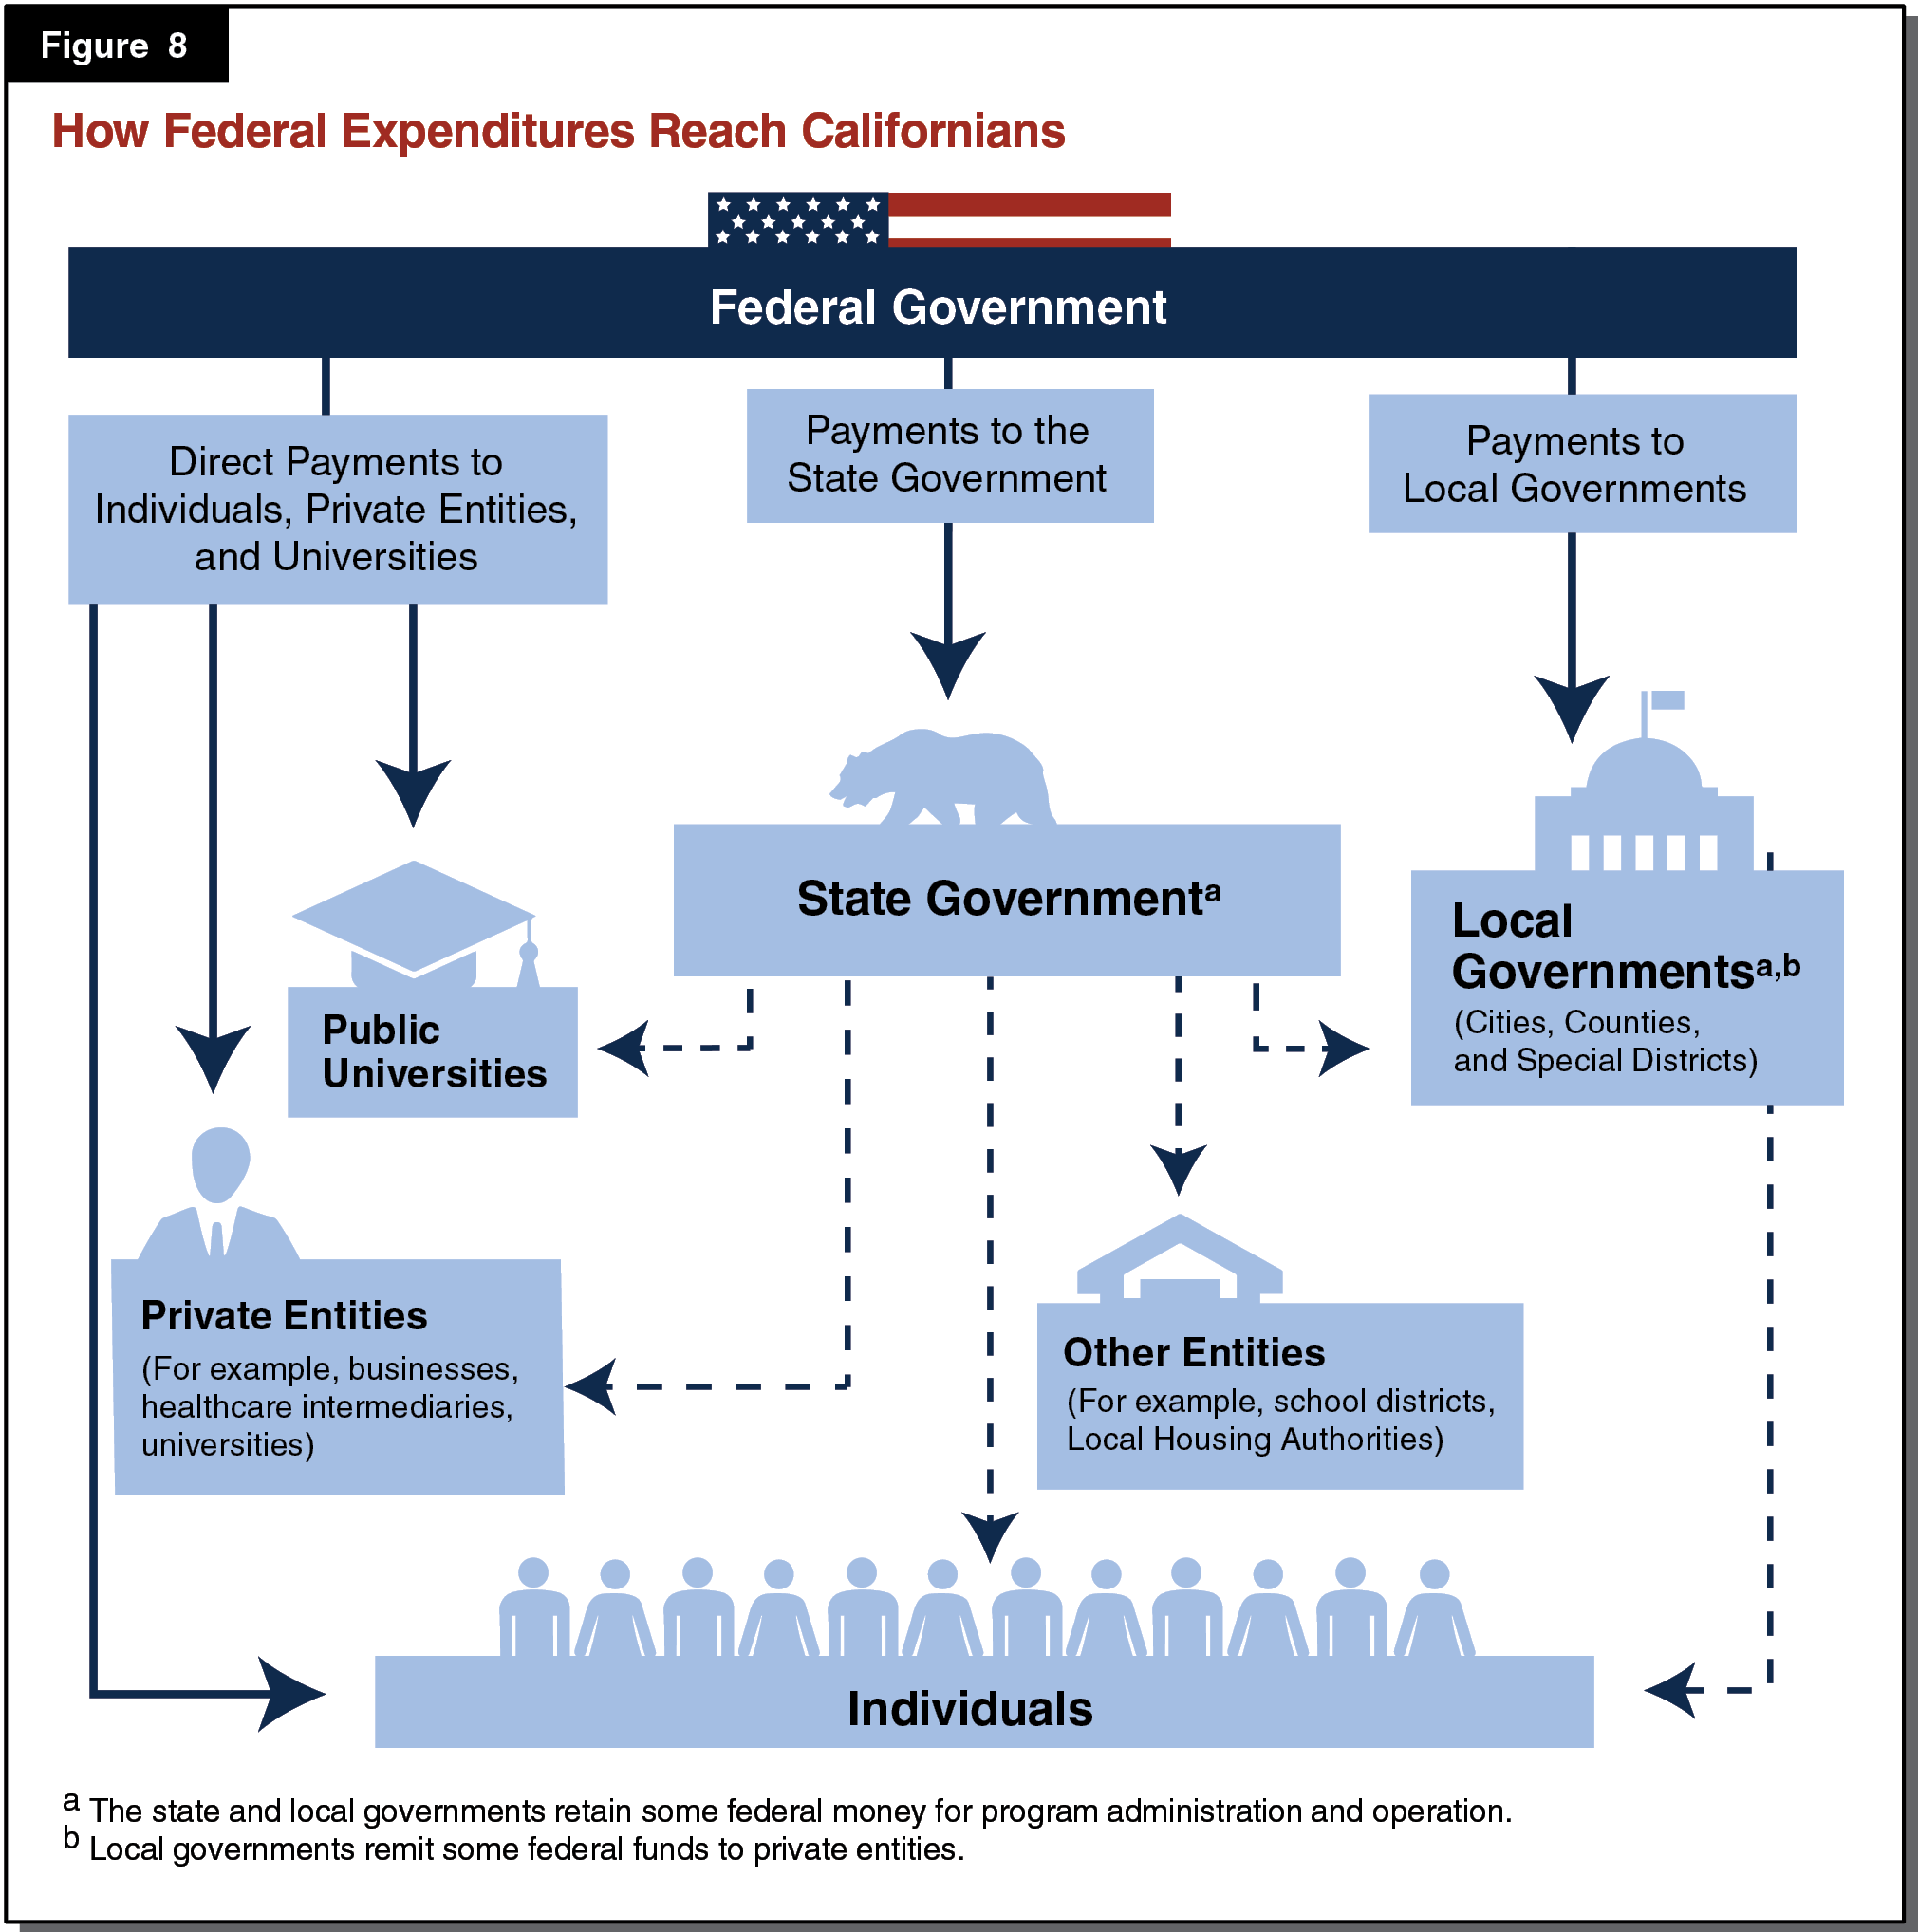 Figure 8 - How Federal Expenditures Reach Californians